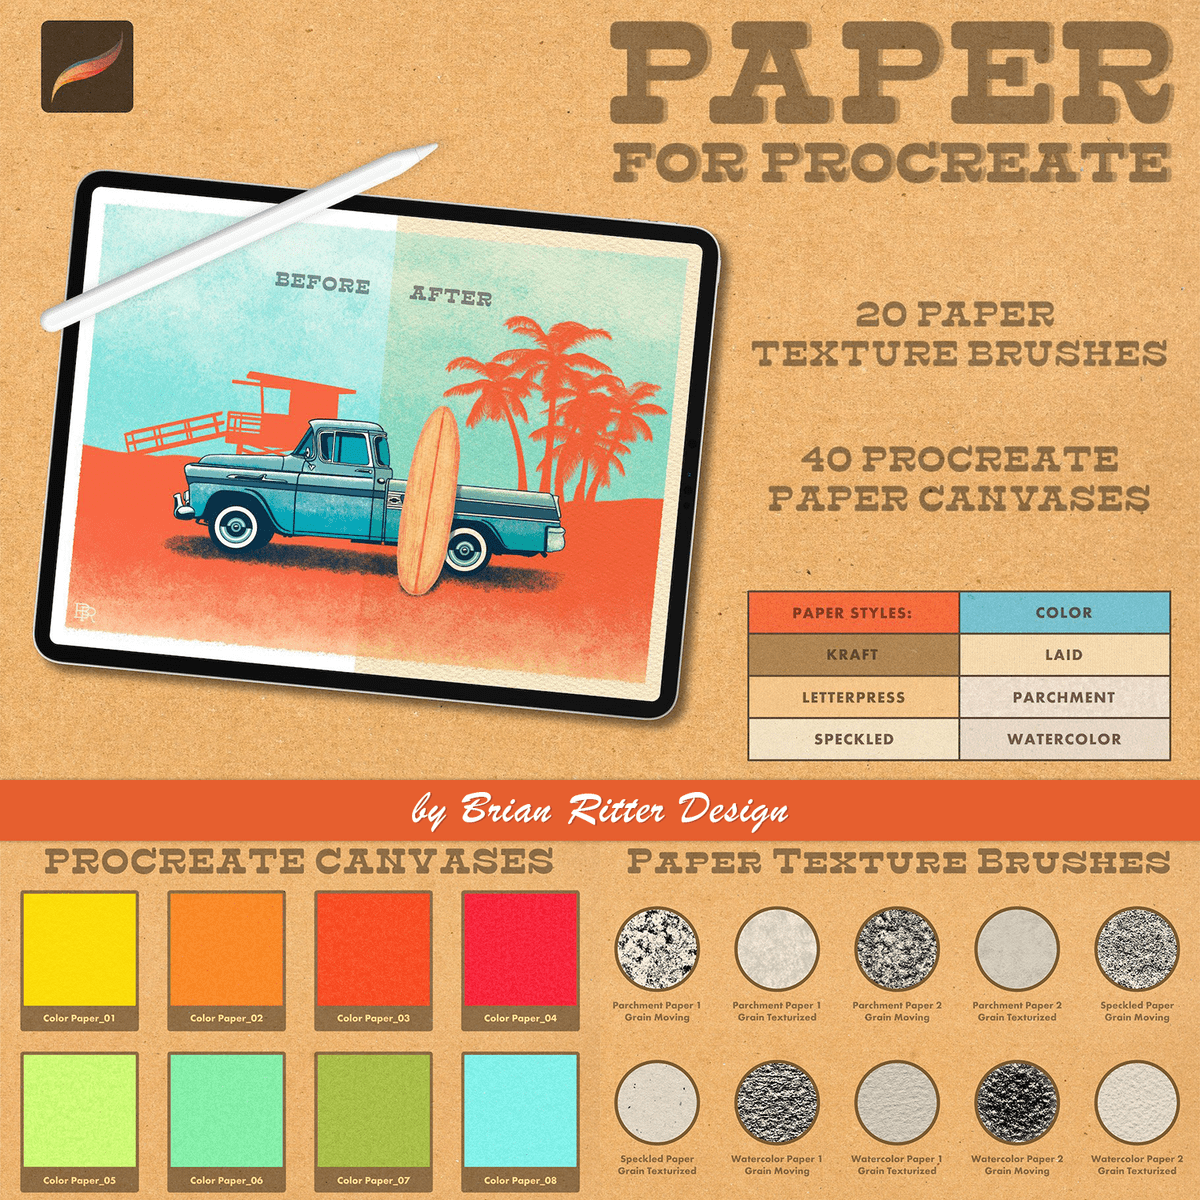 20 paper texture brushes with image of car.